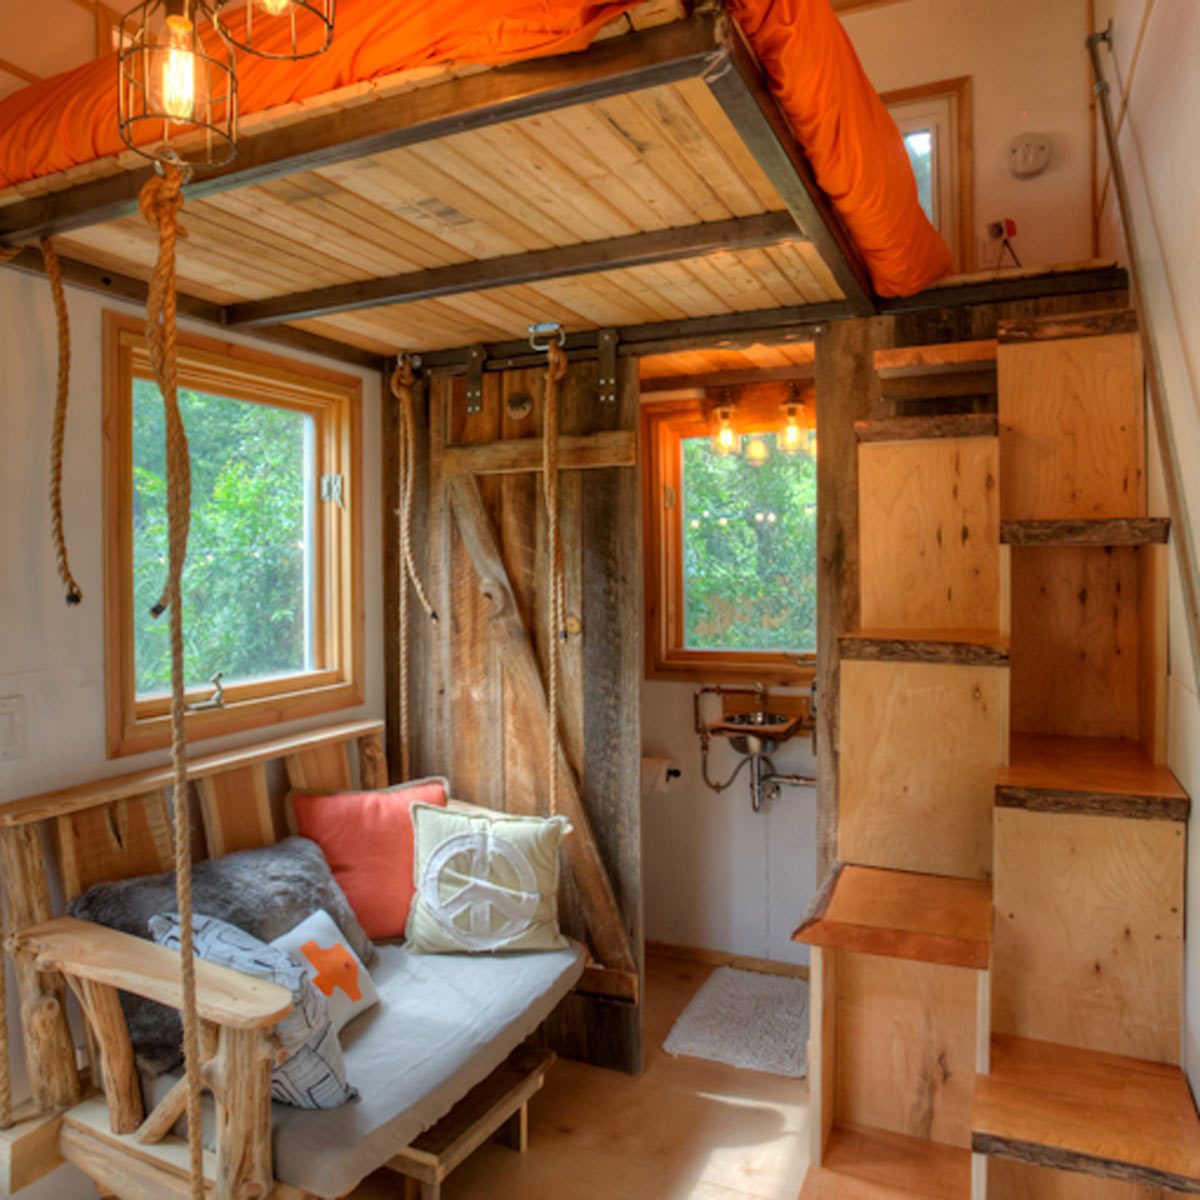 Tiny Homes Are Redefining How We Live - SPACES Magazine